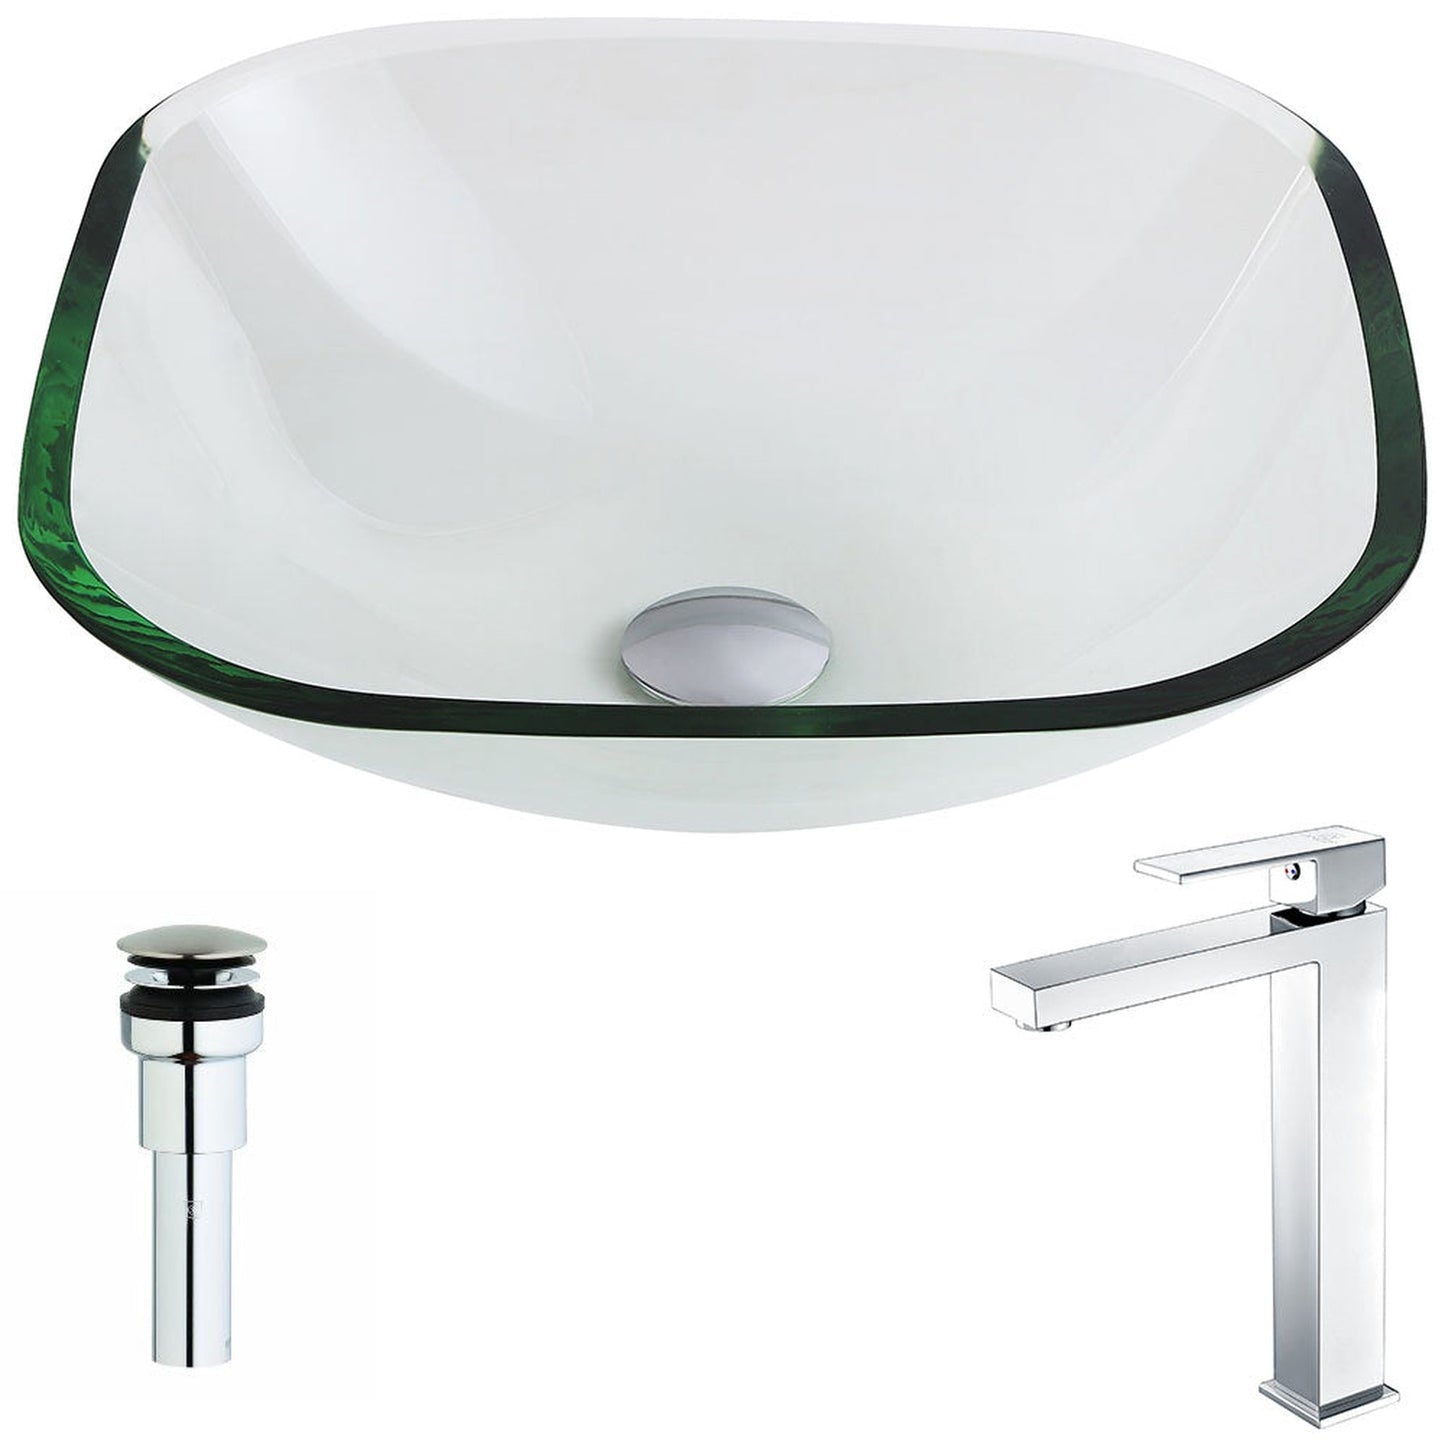 ANZZI Cadenza Series 17" x 17" Square Shape Lustrous Clear Deco-Glass Vessel Sink With Chrome Pop-Up Drain and Enti Faucet